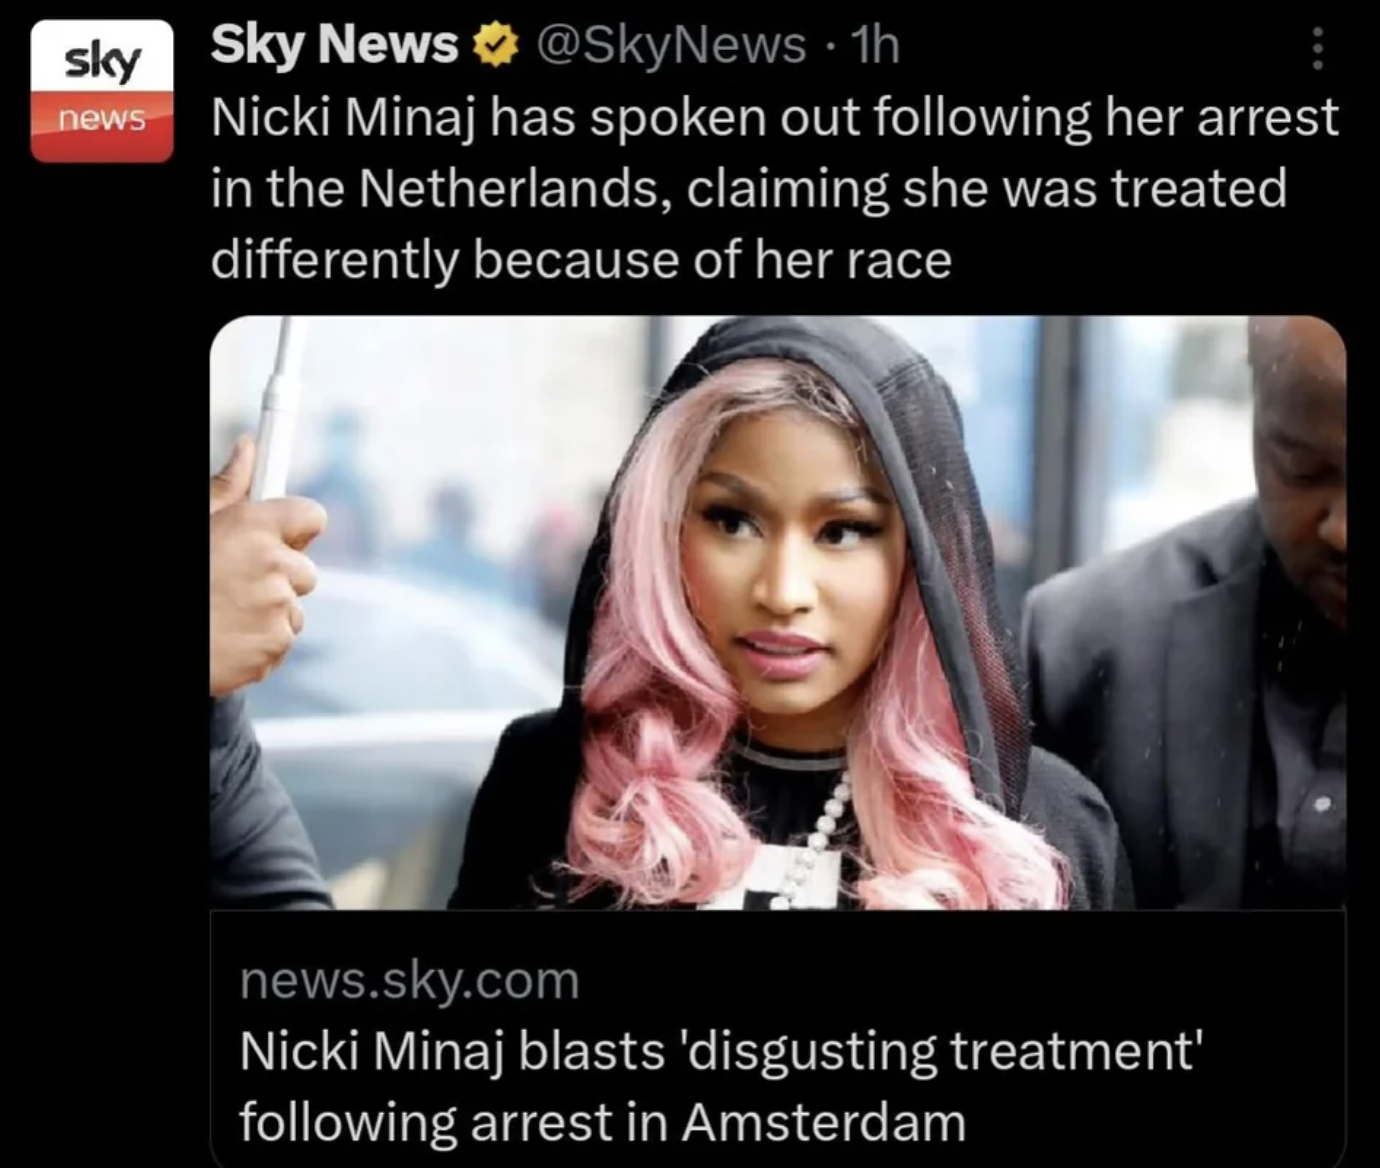 nicki minaj fans - sky Sky News 1h news Nicki Minaj has spoken out ing her arrest in the Netherlands, claiming she was treated differently because of her race news.sky.com Nicki Minaj blasts 'disgusting treatment' ing arrest in Amsterdam